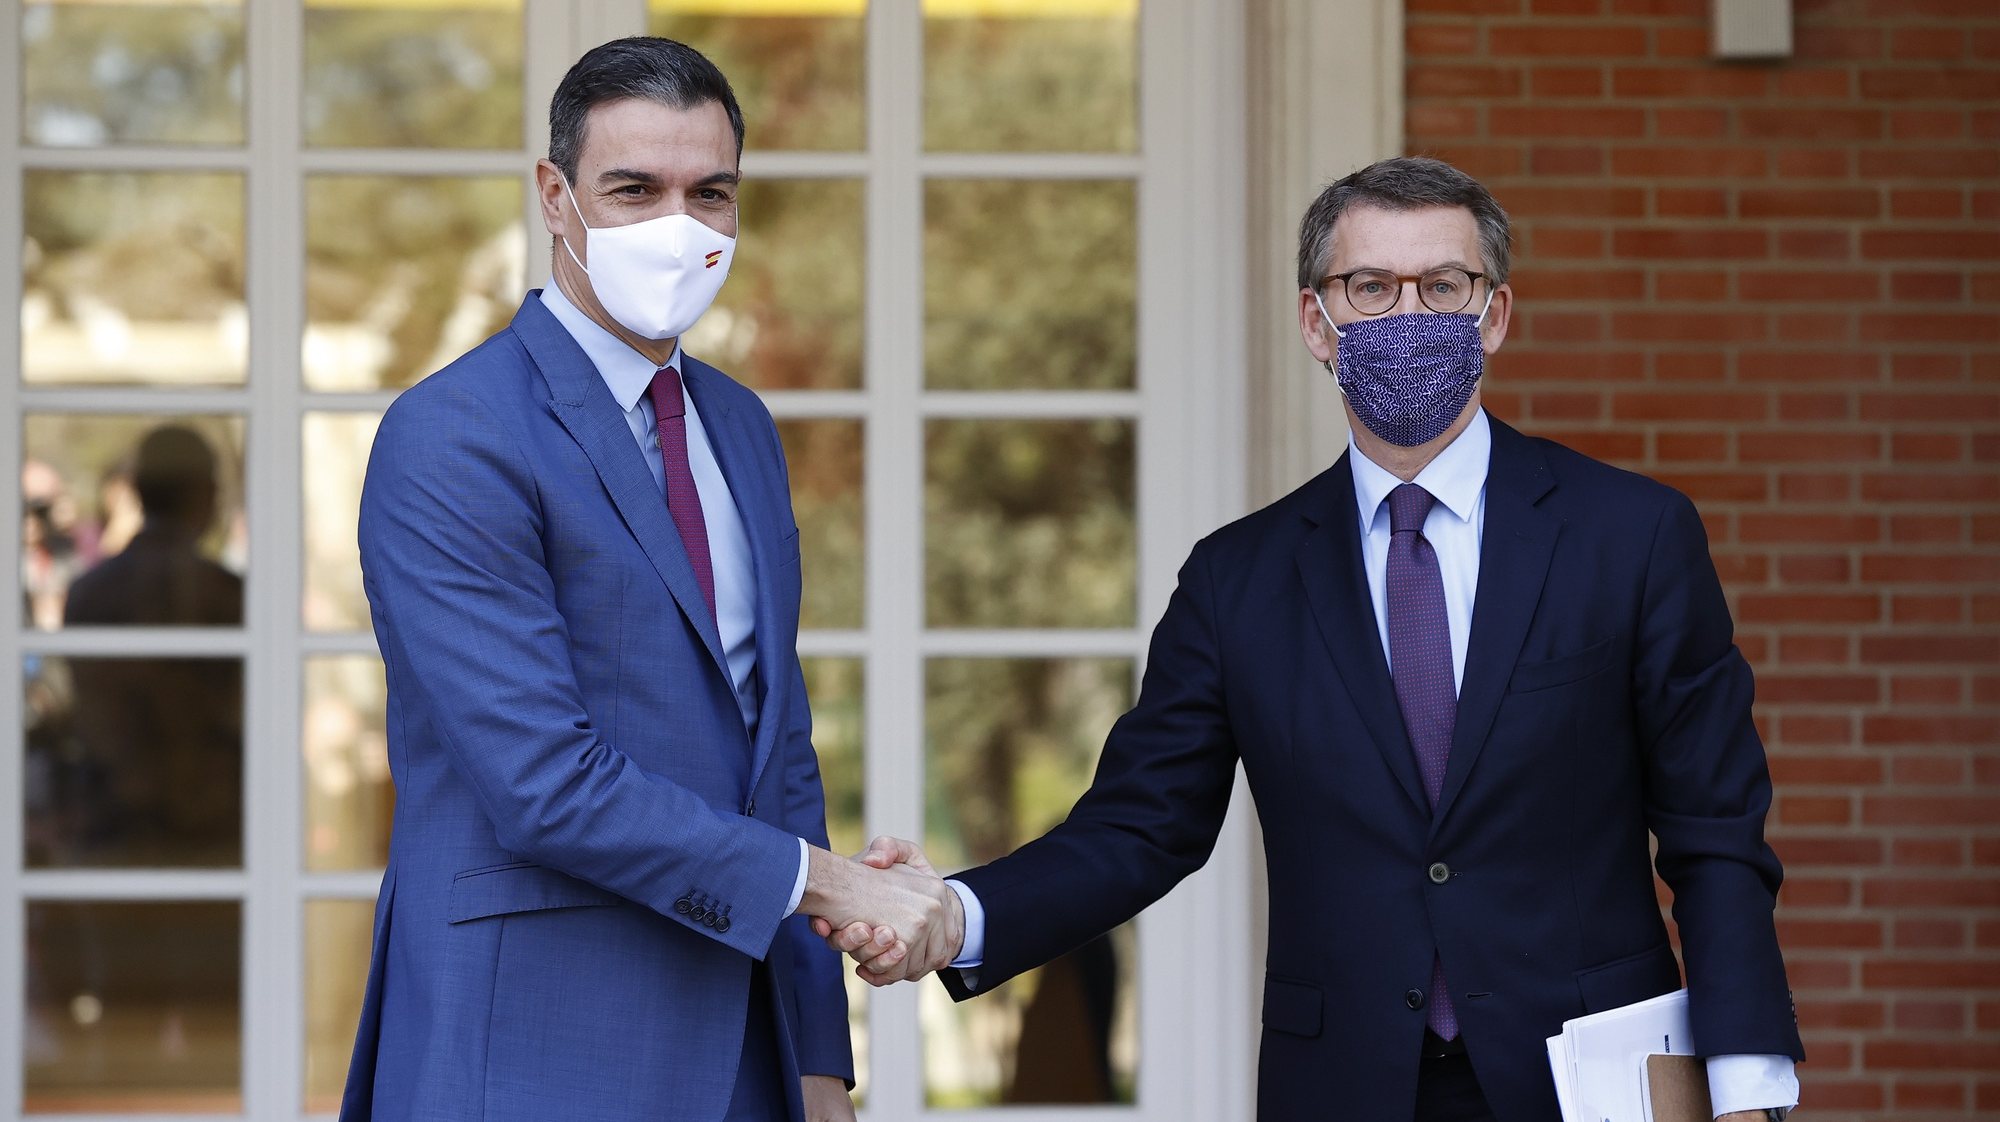 epa09875188 Spanish Prime Minister Pedro Sanchez (L) receives Popular Party leader Alberto Nunez Feijoo (R) before their meeting held at Moncloa Palace in Madrid, Spain, 07 April 2022. This is their first meeting after Feijoo become leader of the main oposition party.  EPA/Chema Moya